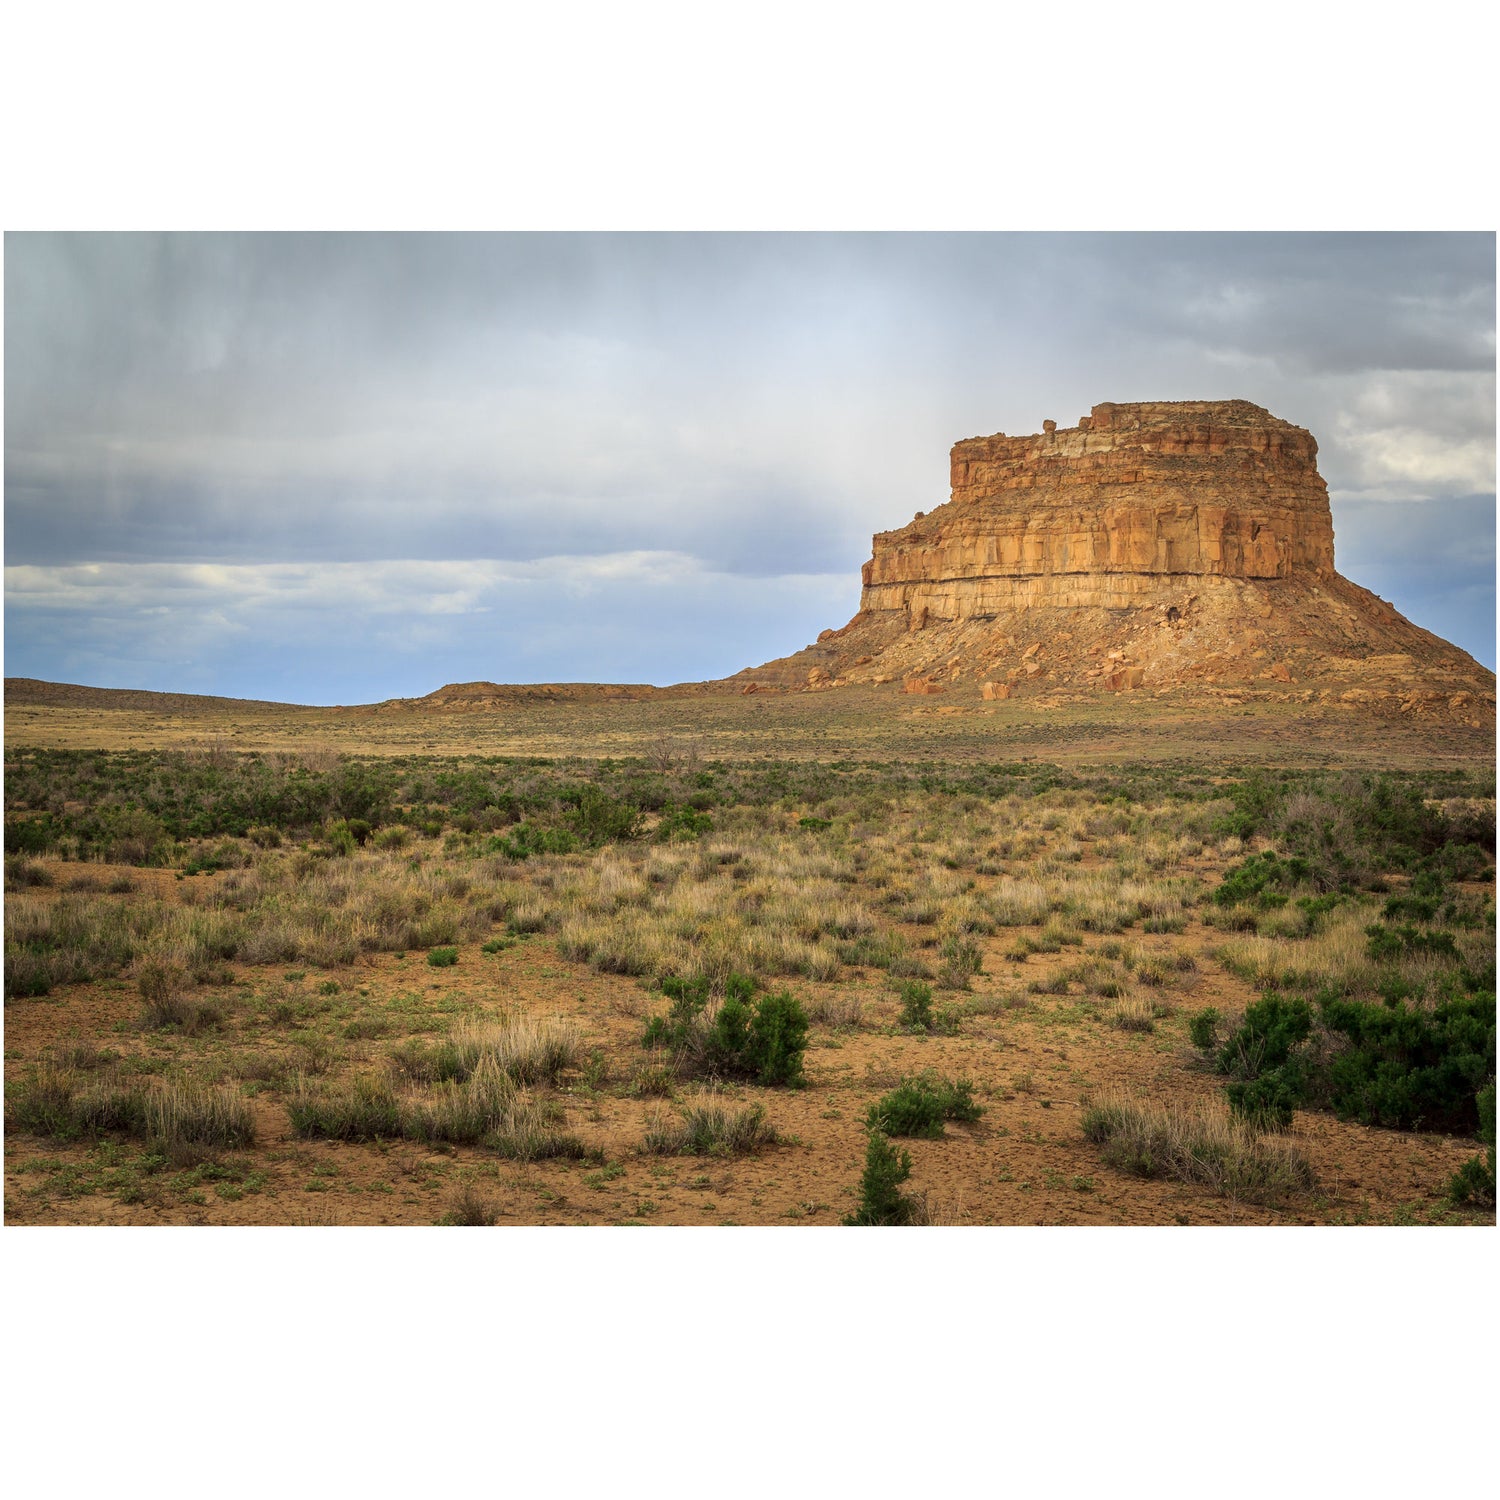 nature wall art of fajada butte in chaco culture national park in new mexico